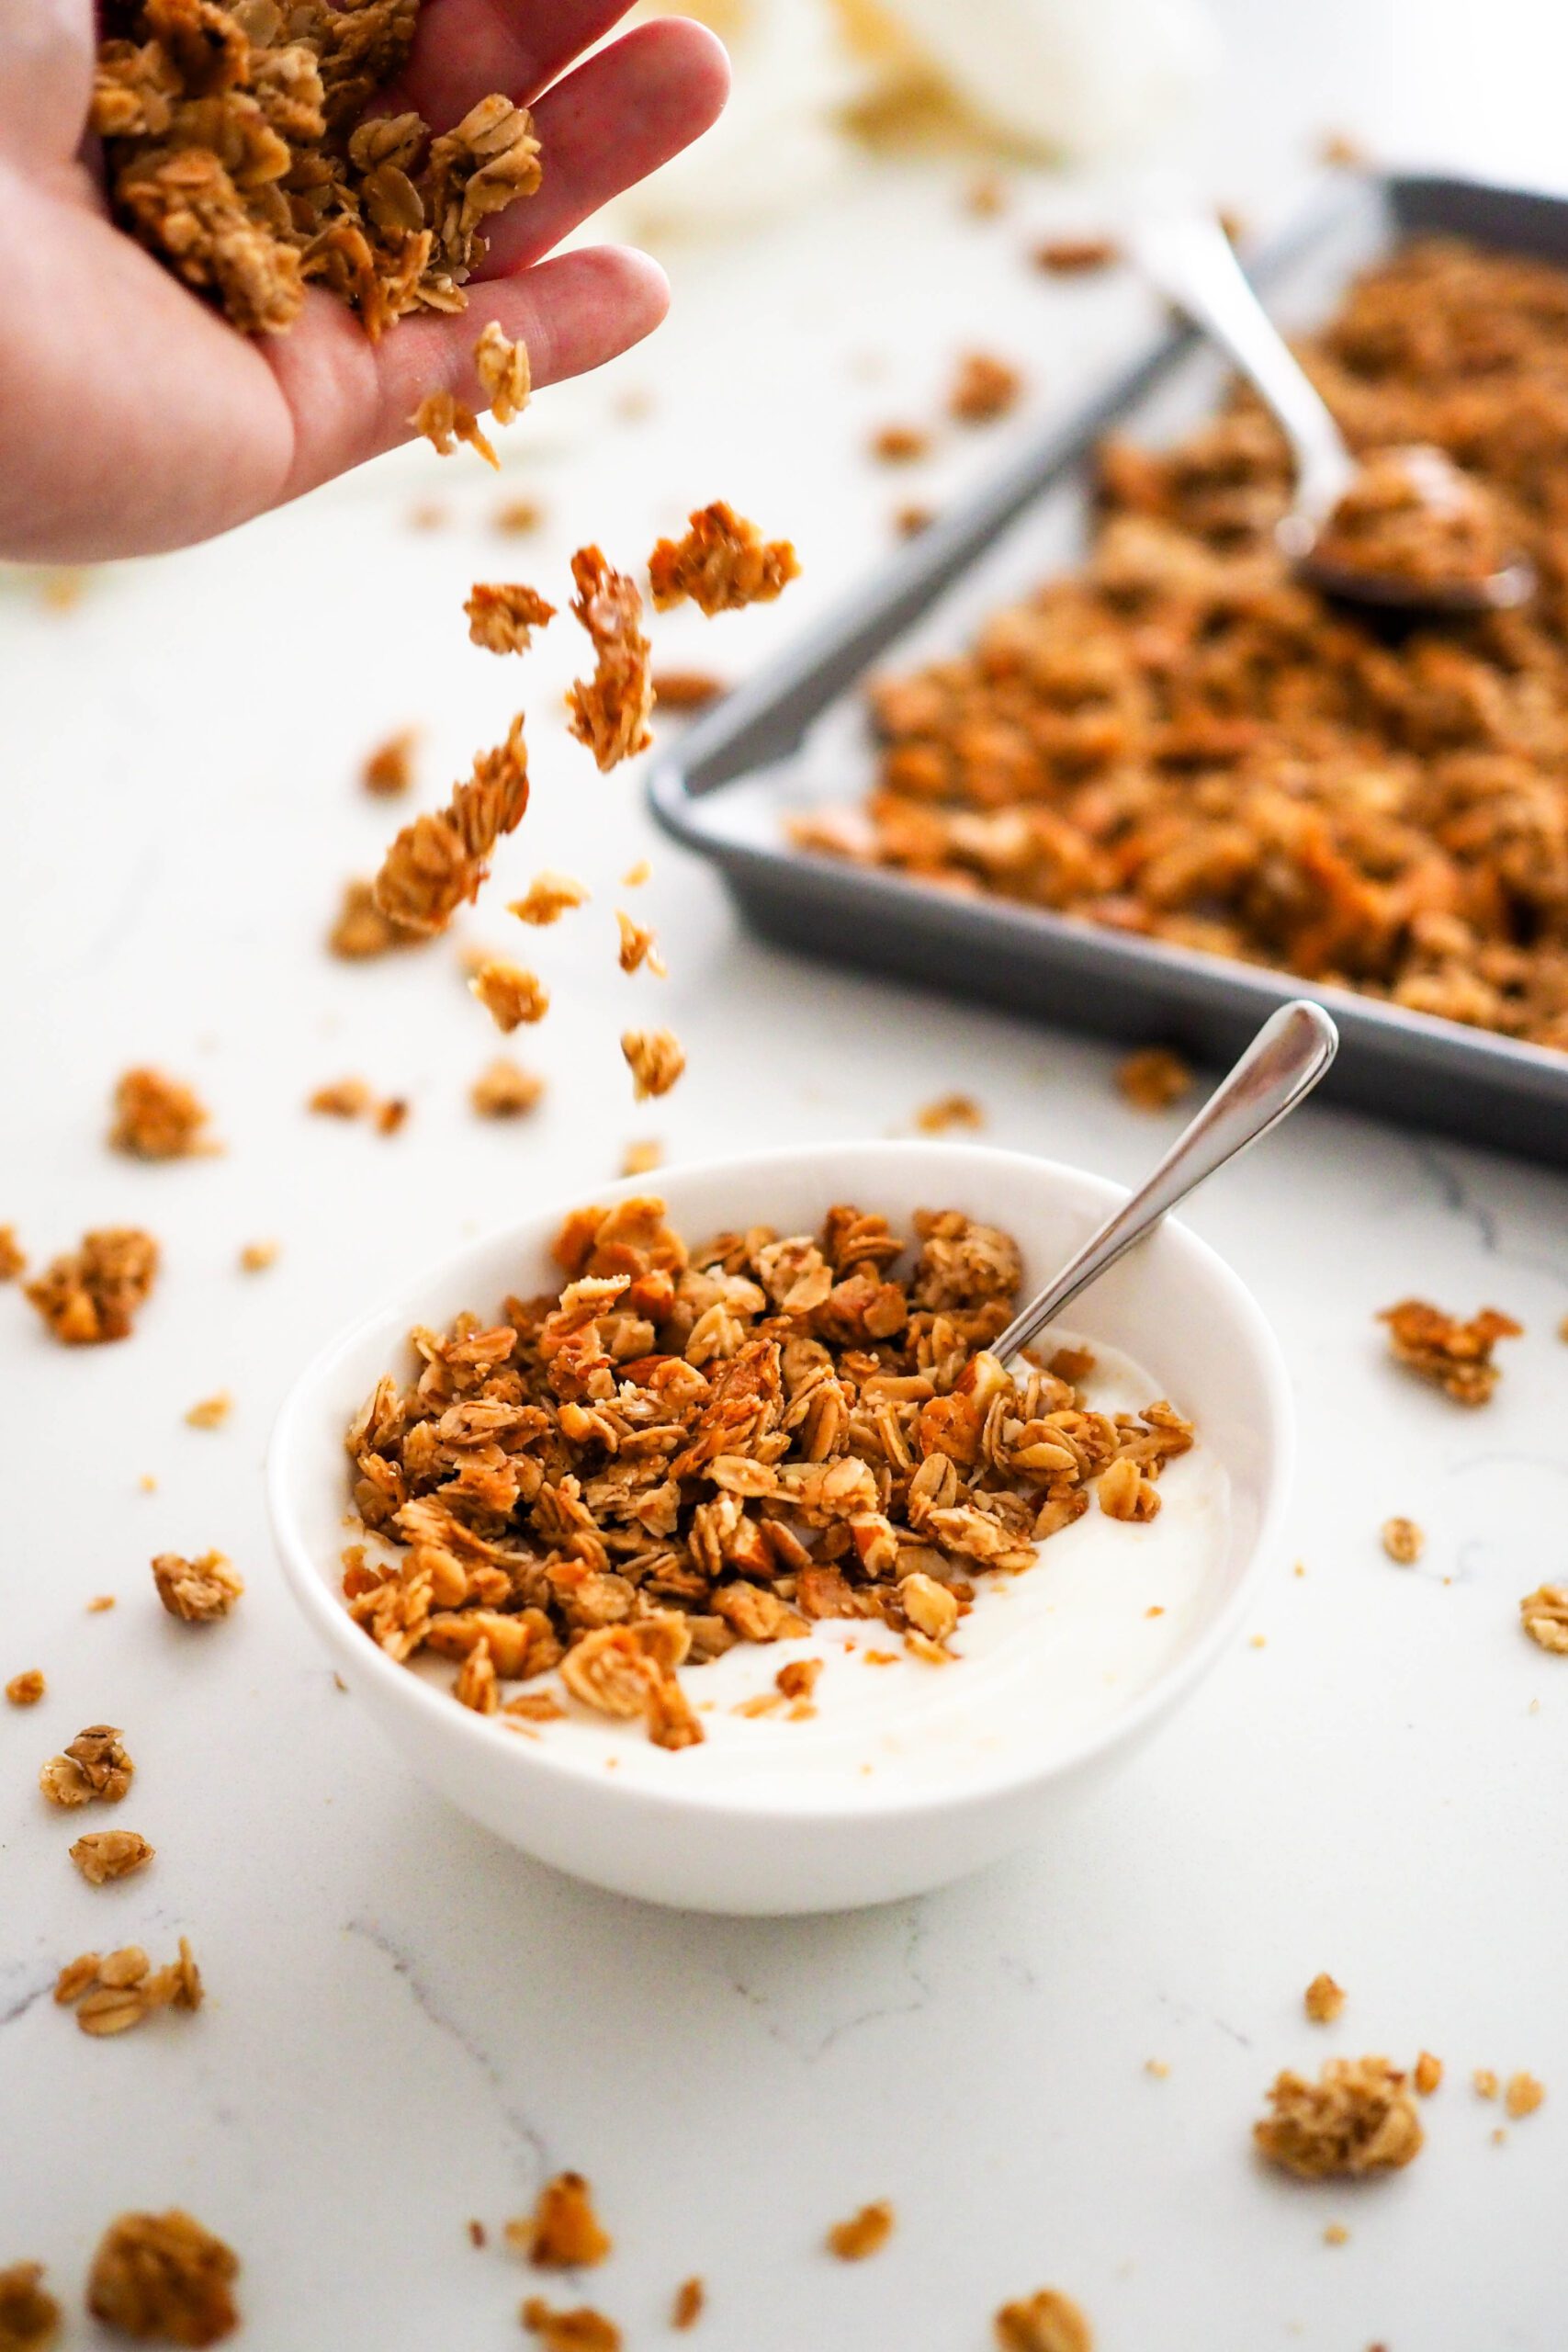 A hand sprinkles granola on top of a bowl of yogurt.